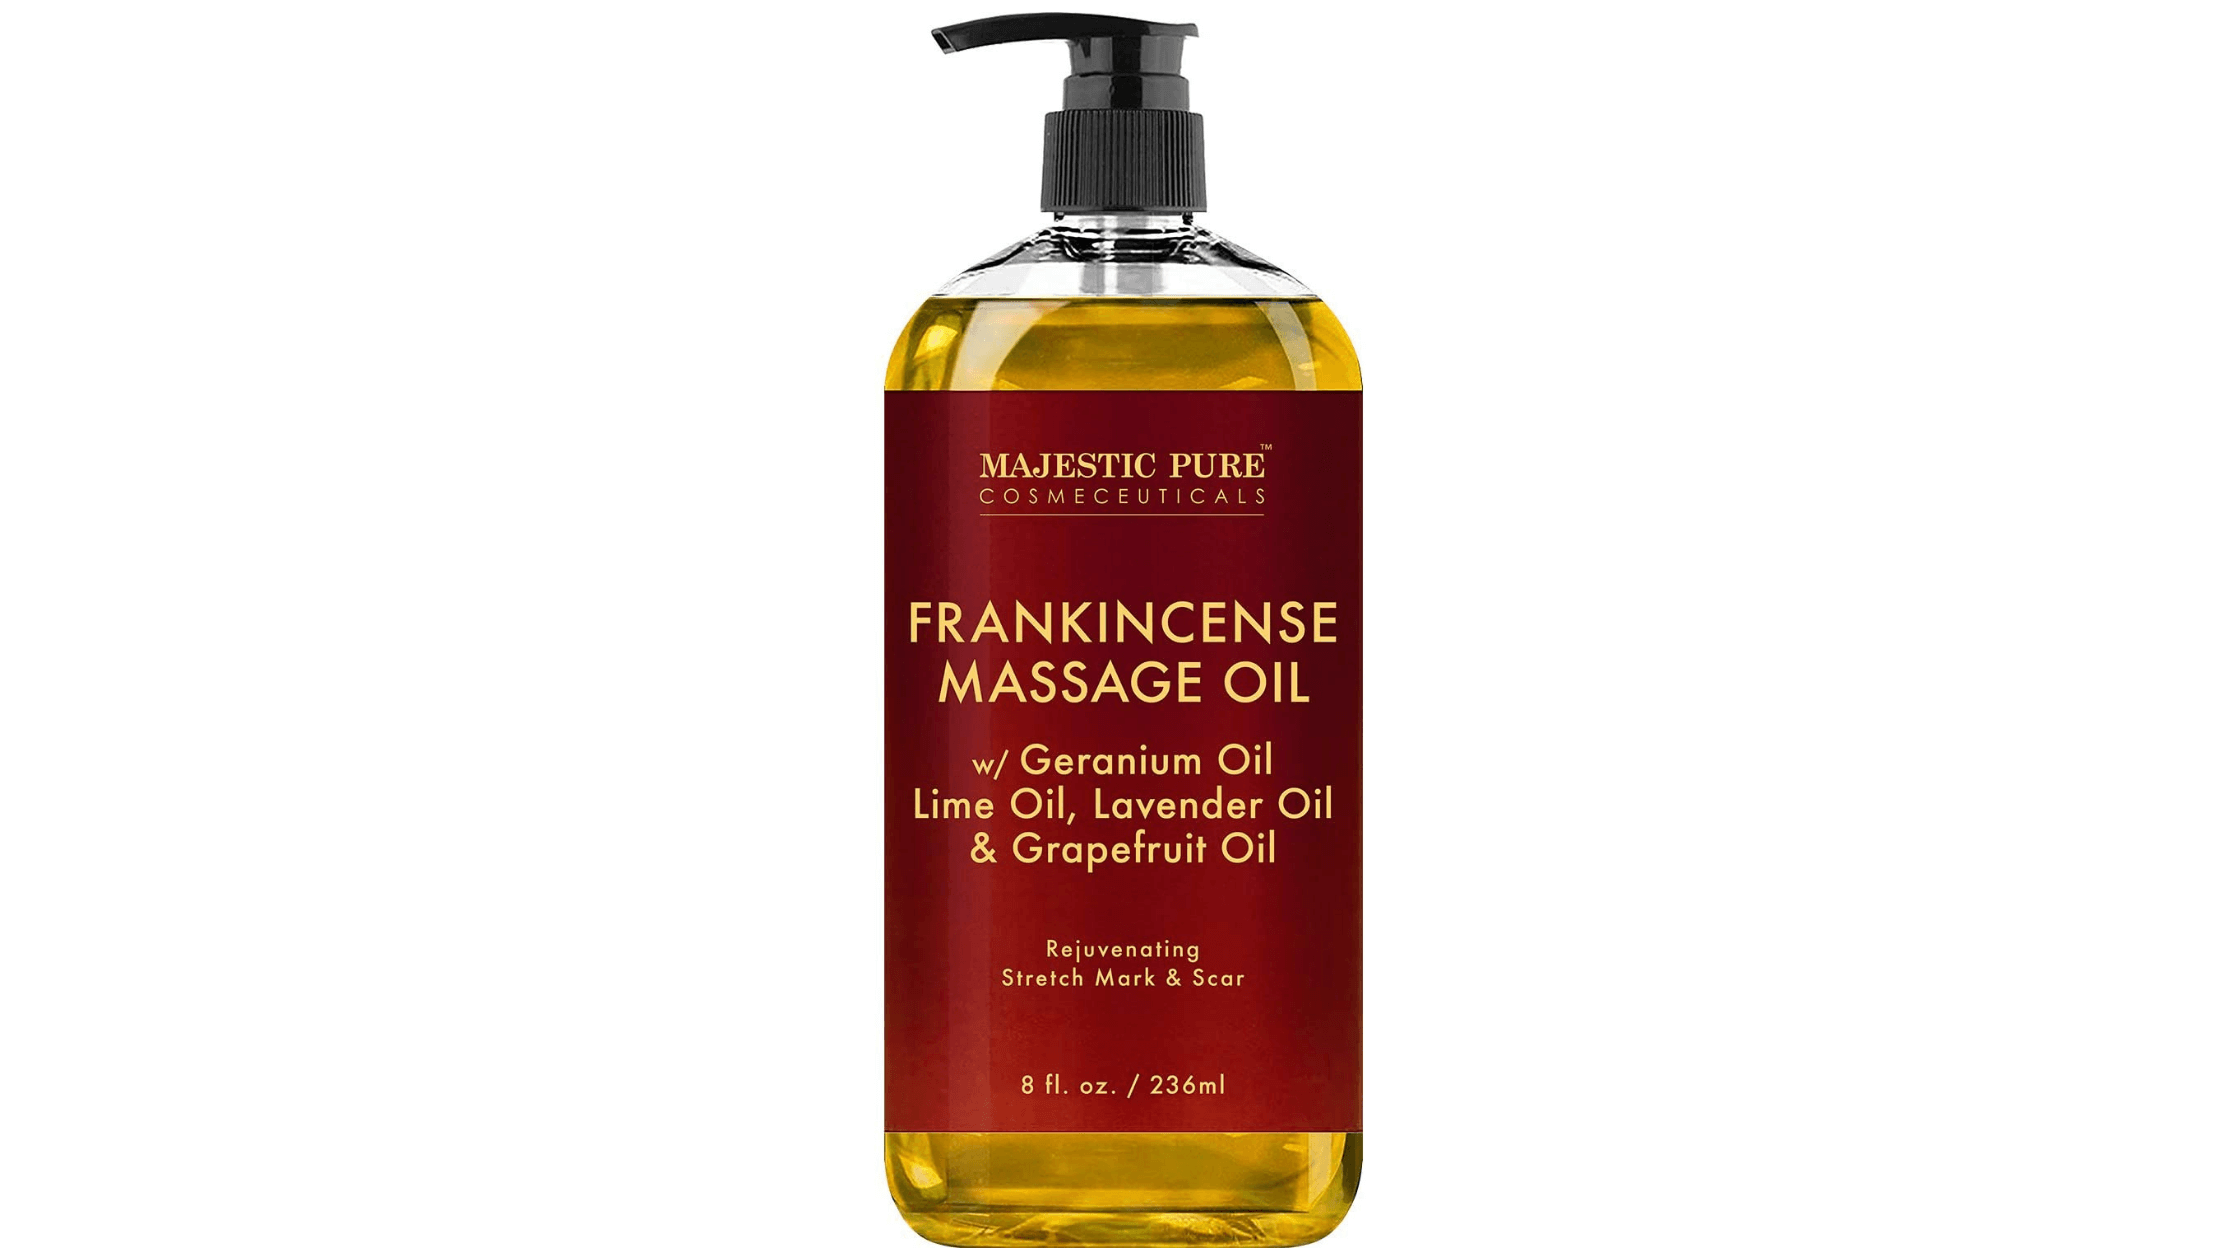 Stretch Mark and Scar Frankincense Massage Oil by Majestic Pure